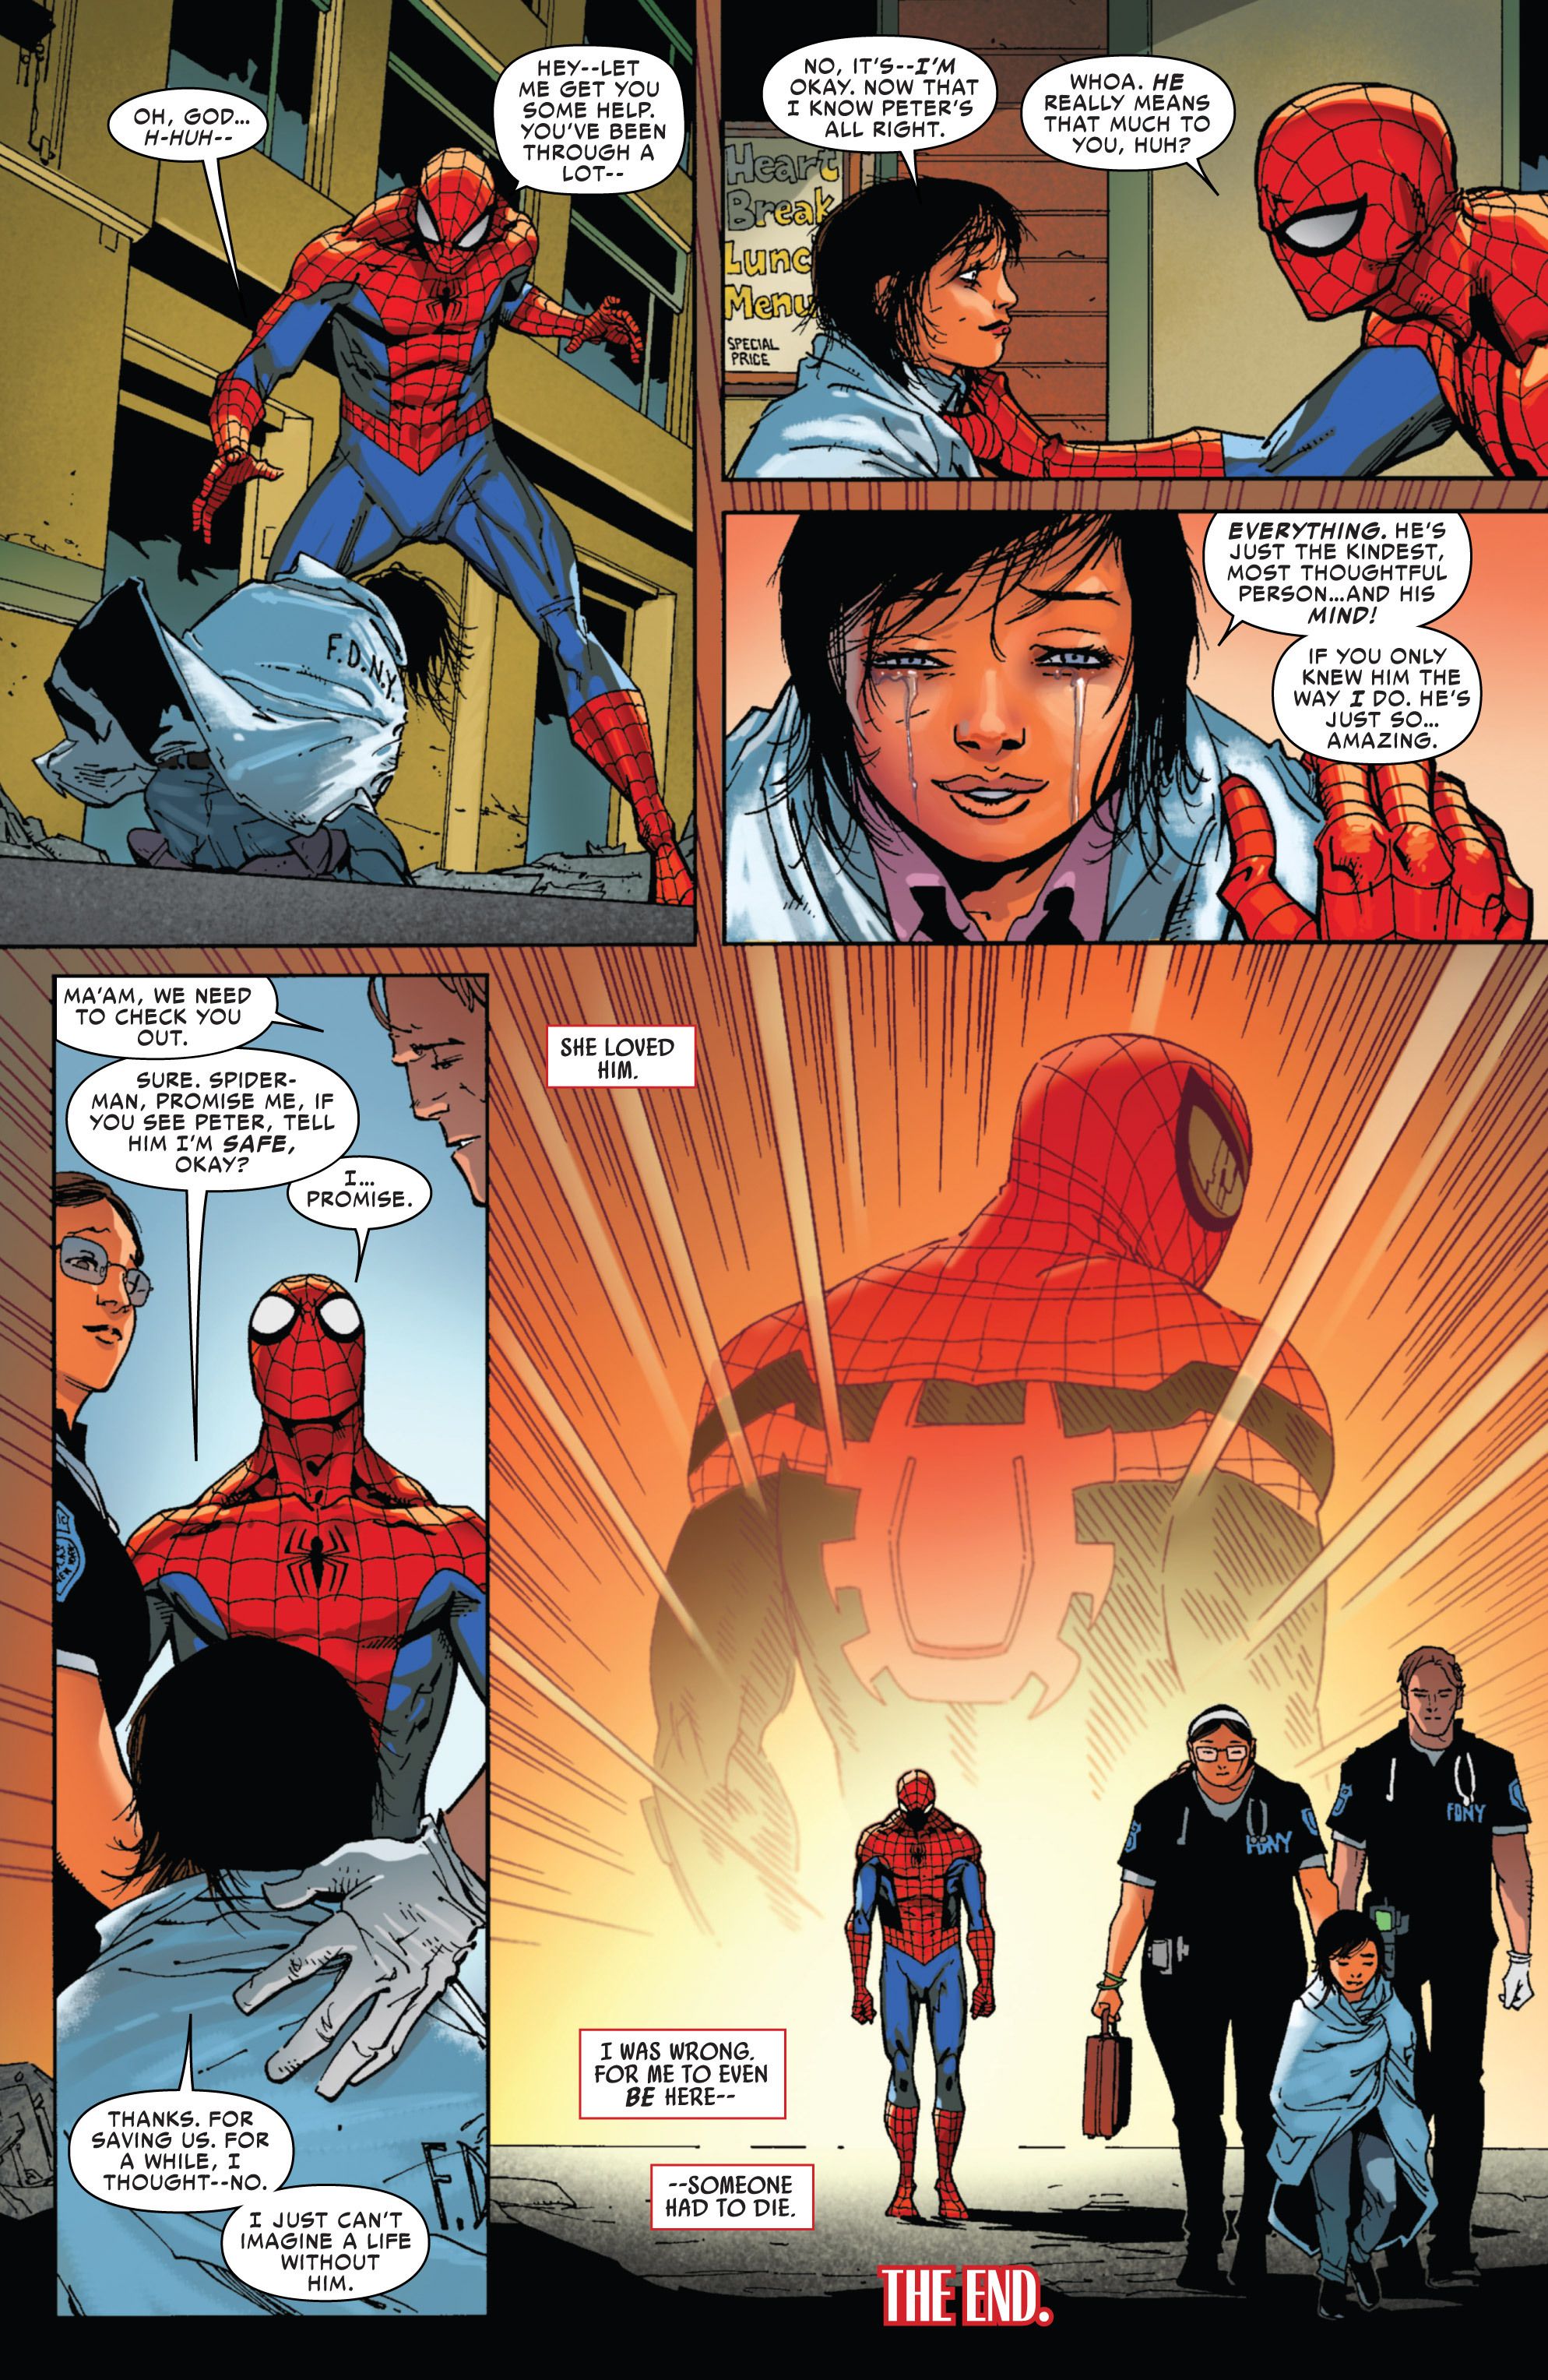 Ten Years Ago, Peter Parker Ended the Reign of the Superior Spider-Man